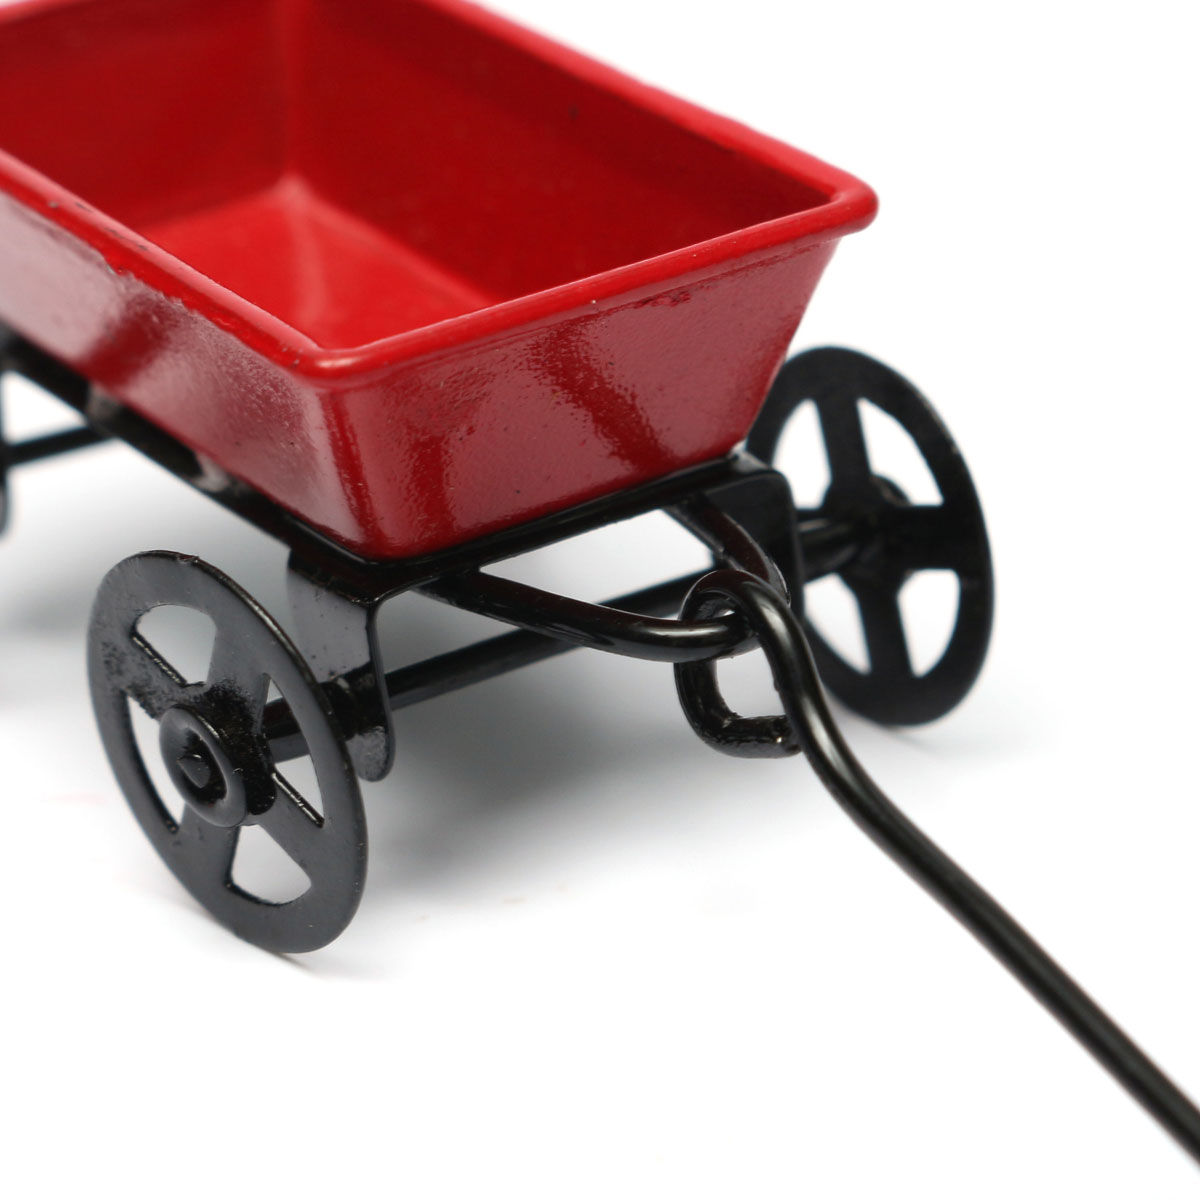 Dollhouse-Metal-Miniature-Toy-Red-Small-Pulling-Cart-Garden-Furniture-Accessories-1016288-2